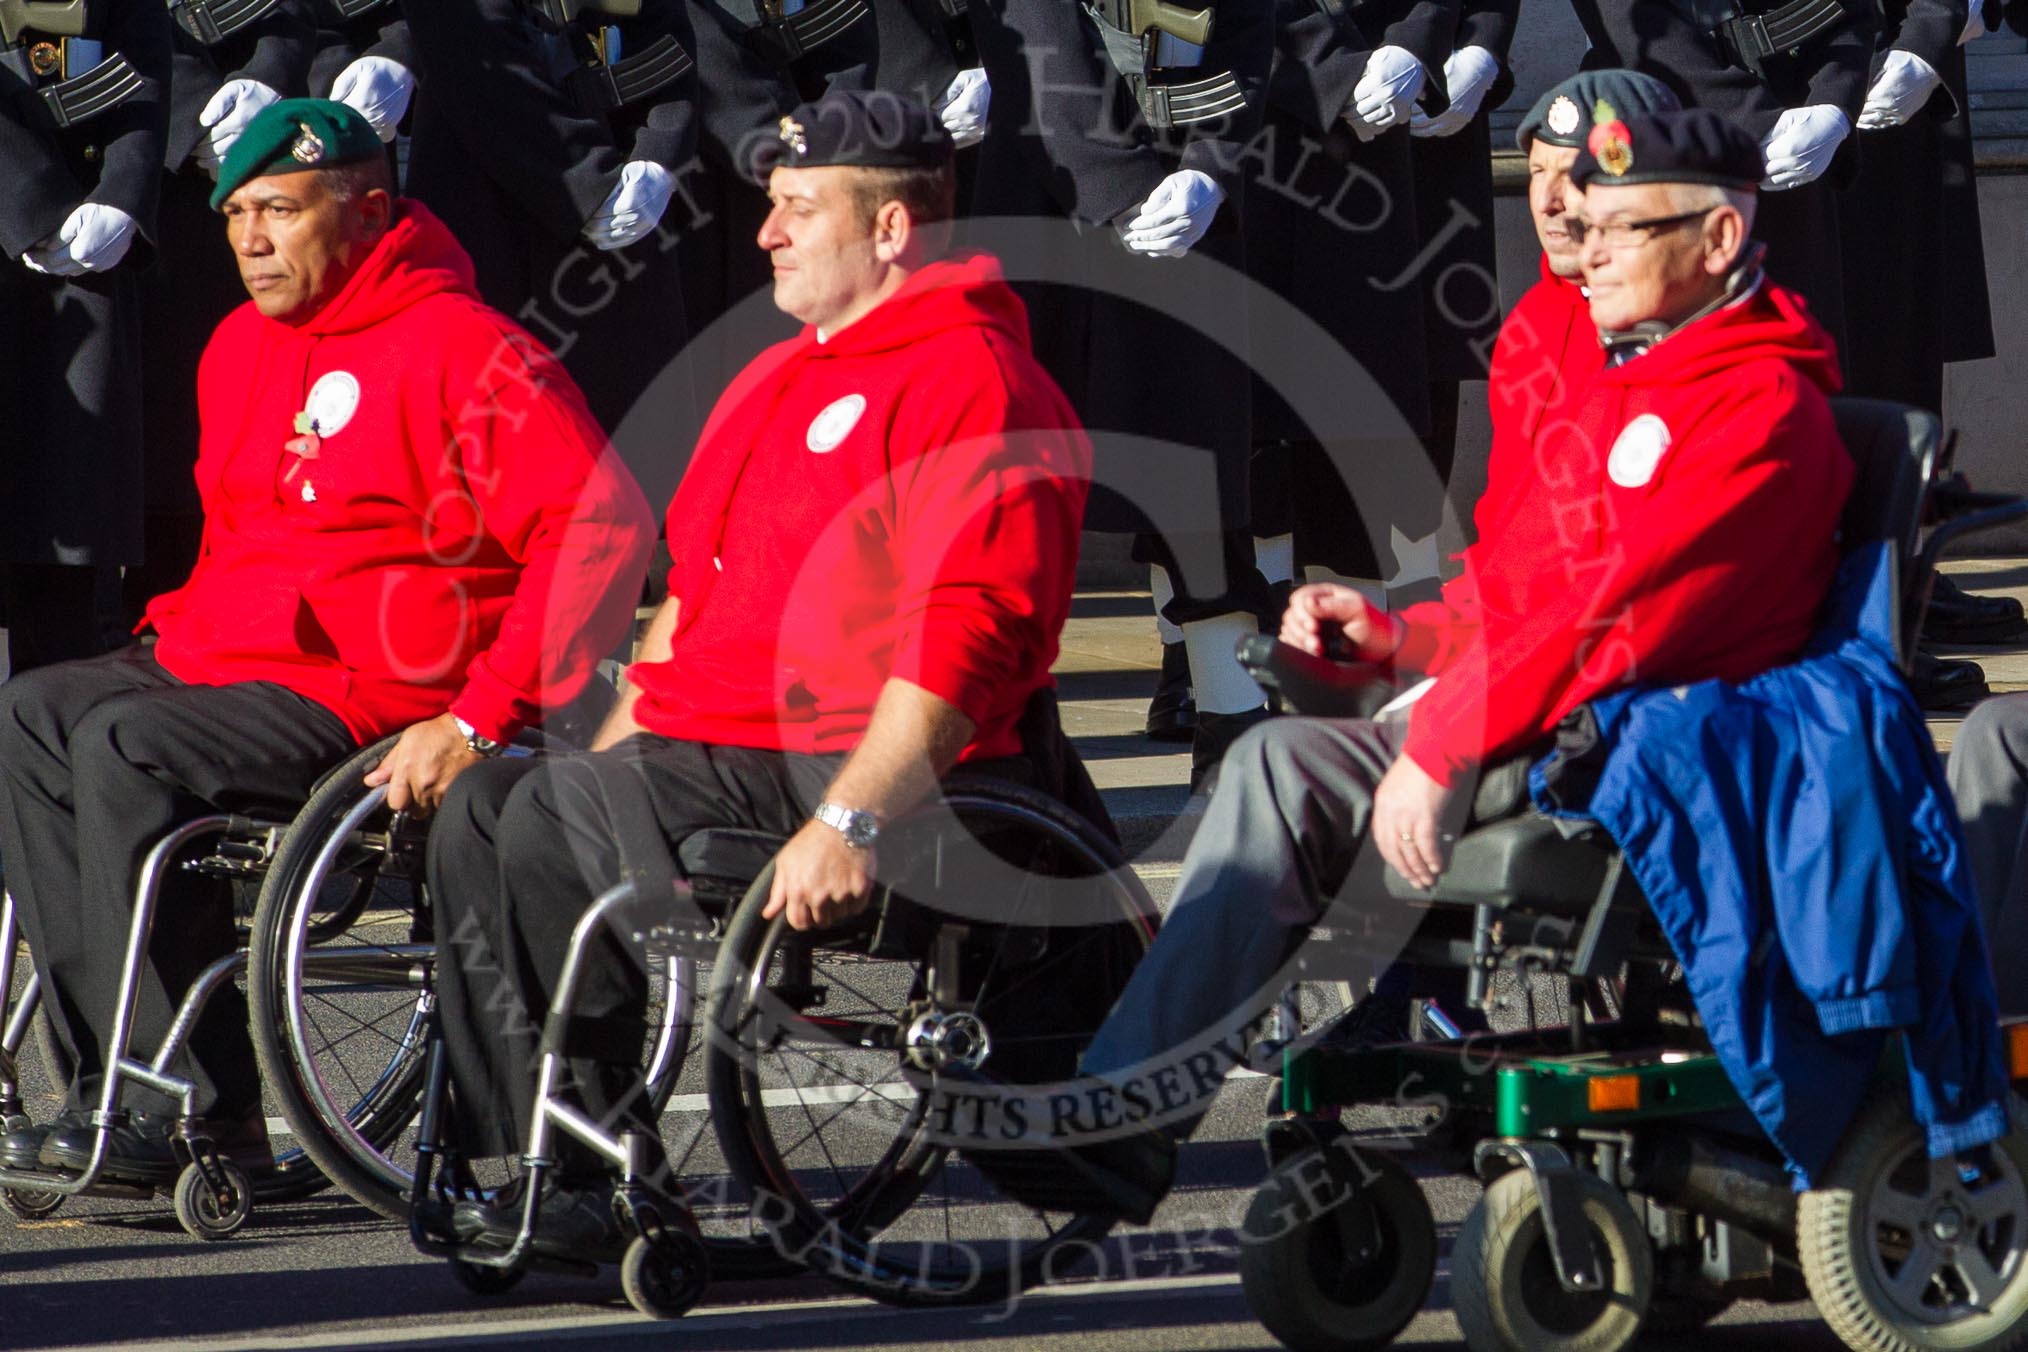 Remembrance Sunday 2012 Cenotaph March Past: Group E42 - British Ex-Services Wheelchair Sports Association..
Whitehall, Cenotaph,
London SW1,

United Kingdom,
on 11 November 2012 at 11:43, image #327